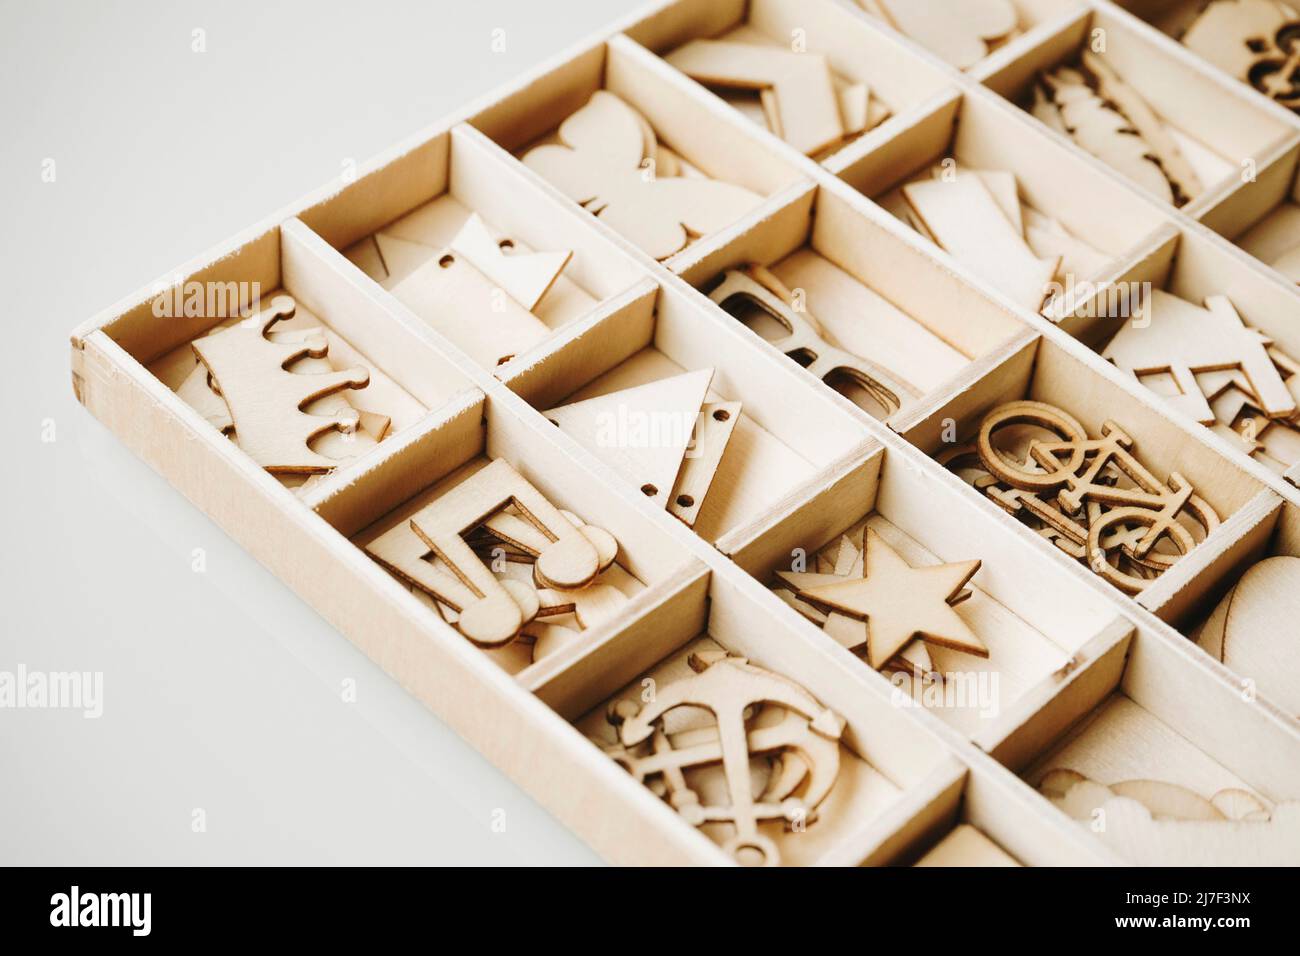 Image of multiple wooden pieces with diferent shapes for diy work Stock Photo